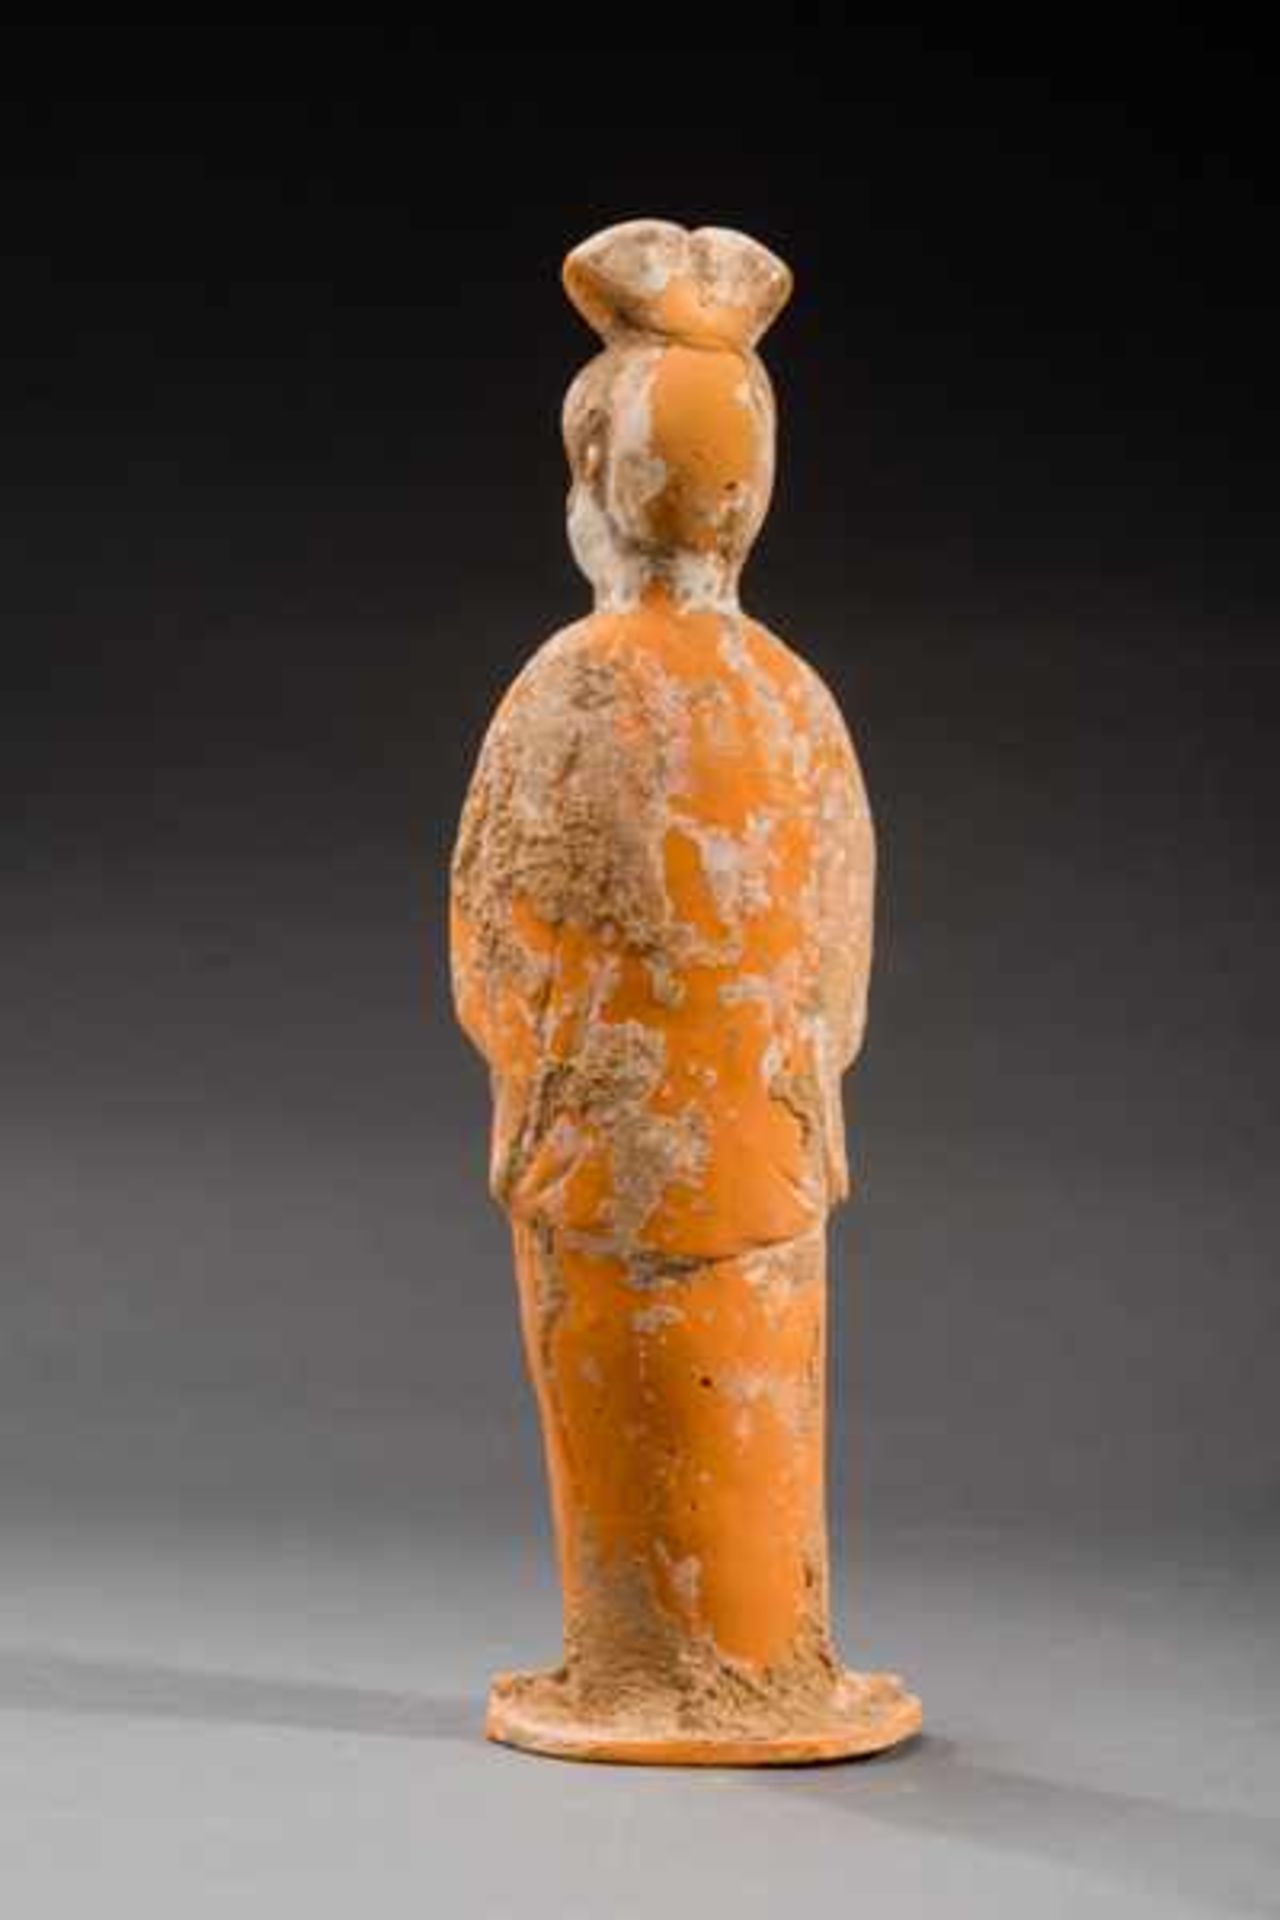 COURTLY LADY Terracotta with remnants of originalpainting. China, Early Tang dynasty (618 - 907) - Image 4 of 6